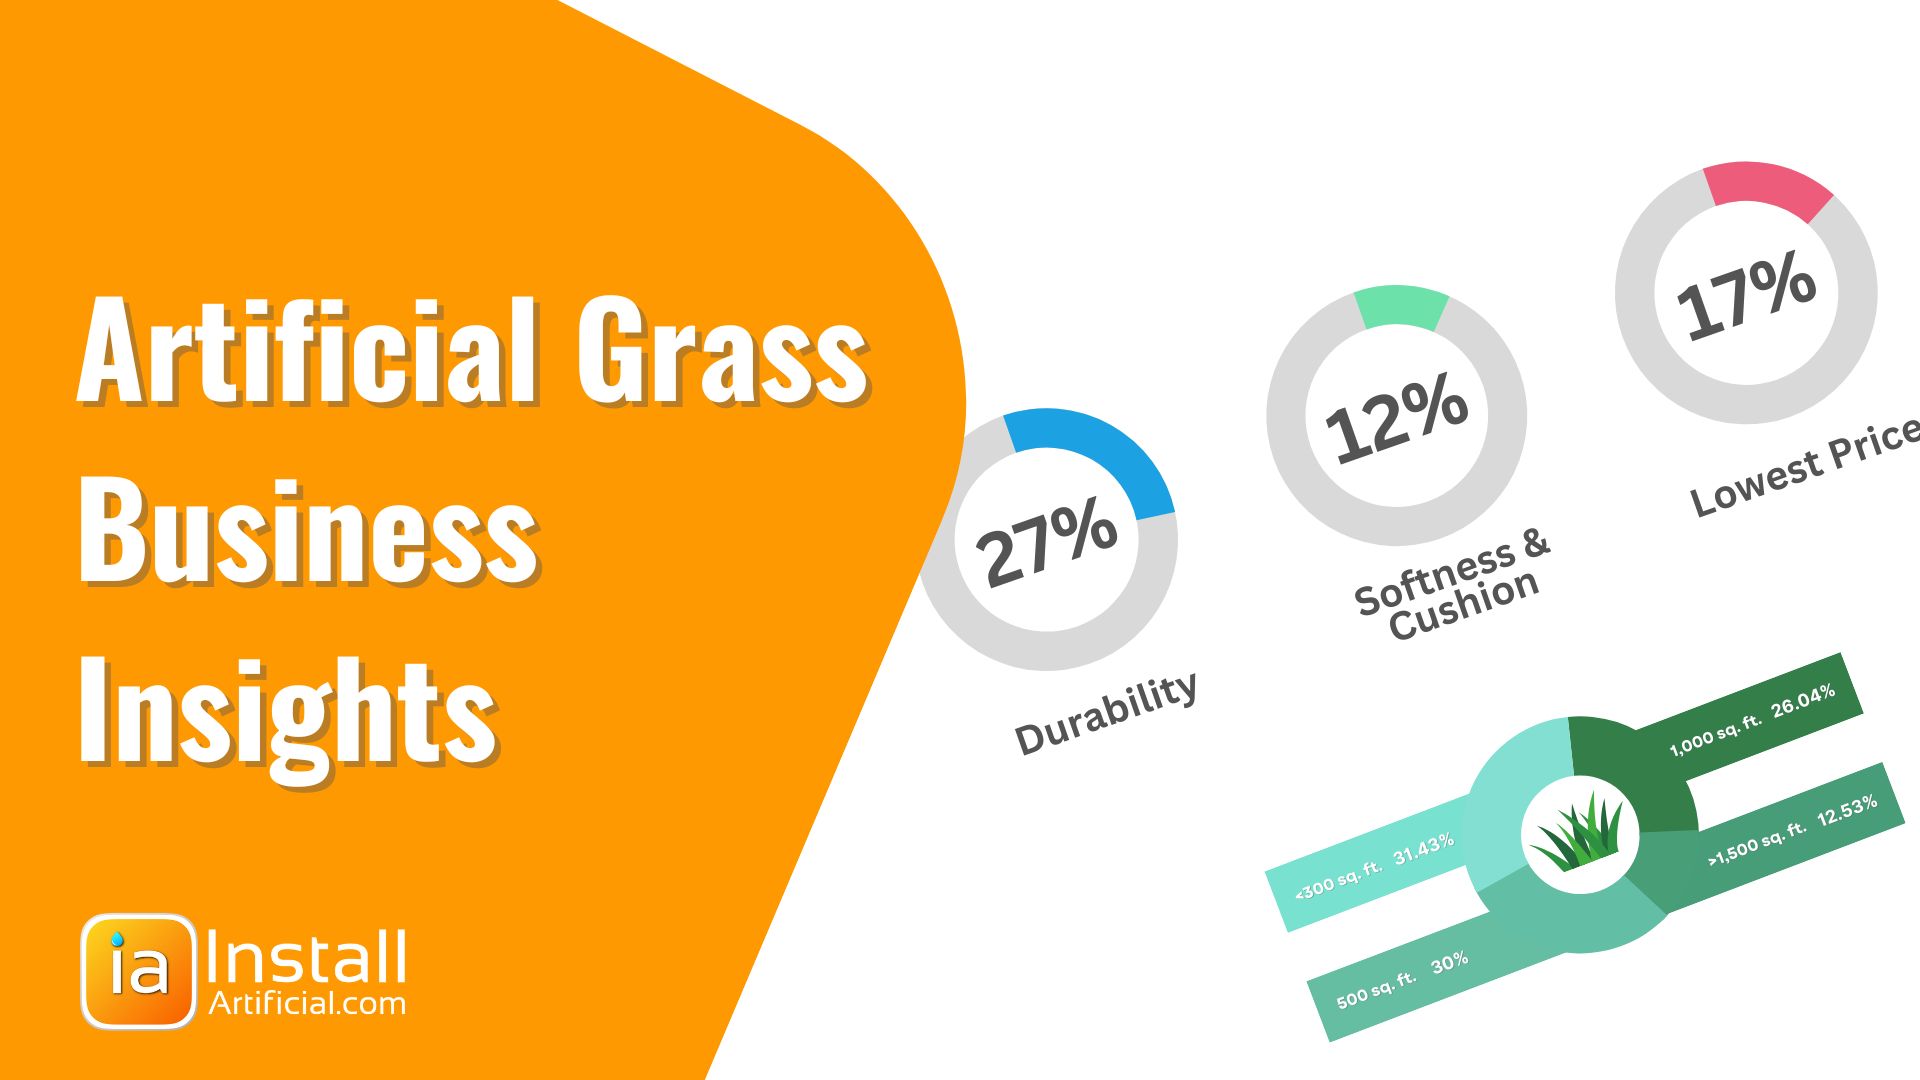 Artificial Grass, Market Trends, Business Insights, and Analysis